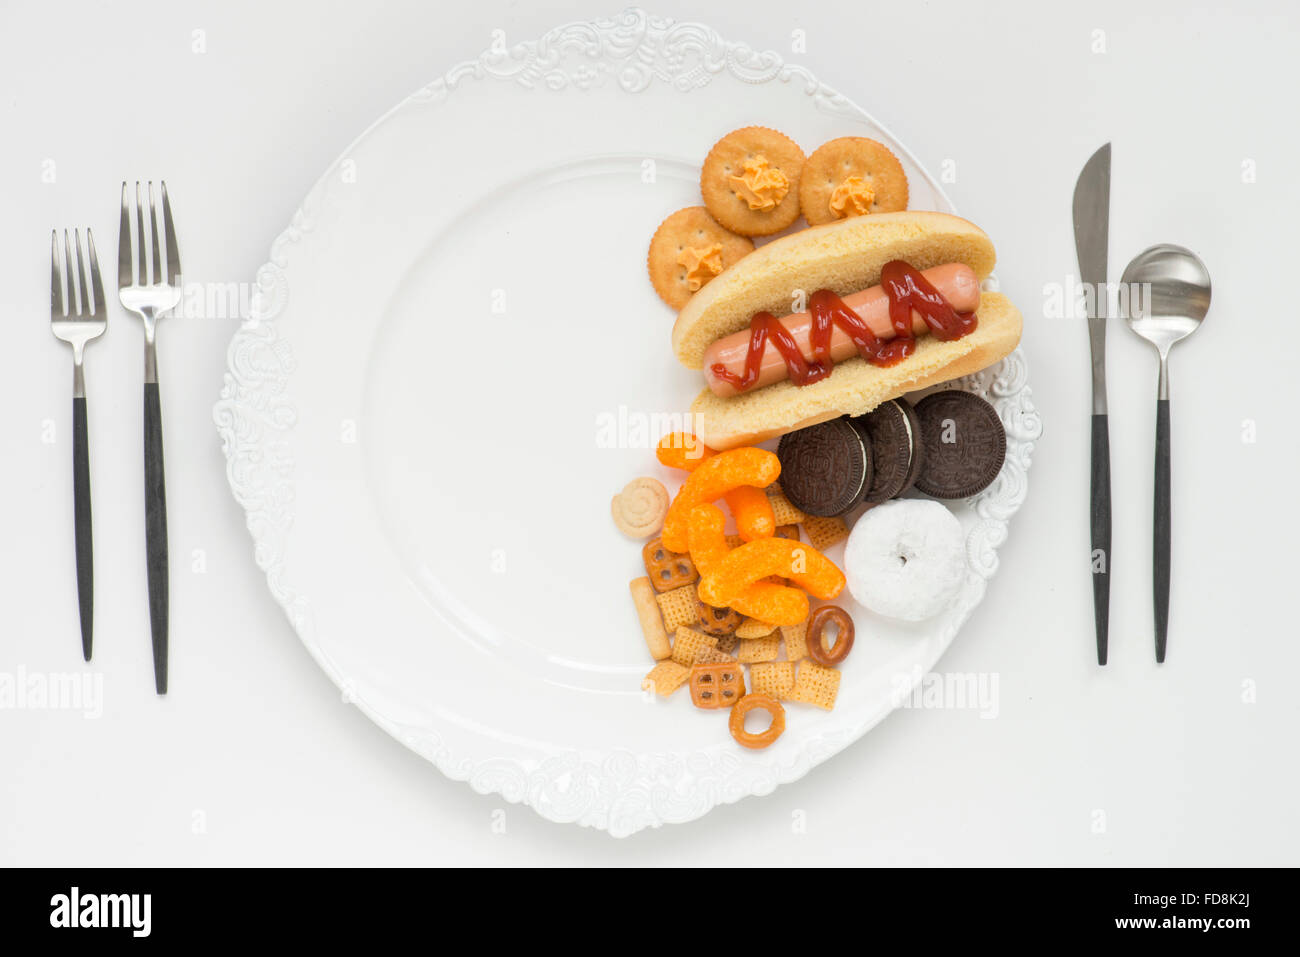 half a plate filled with processed unhealthy foods Stock Photo